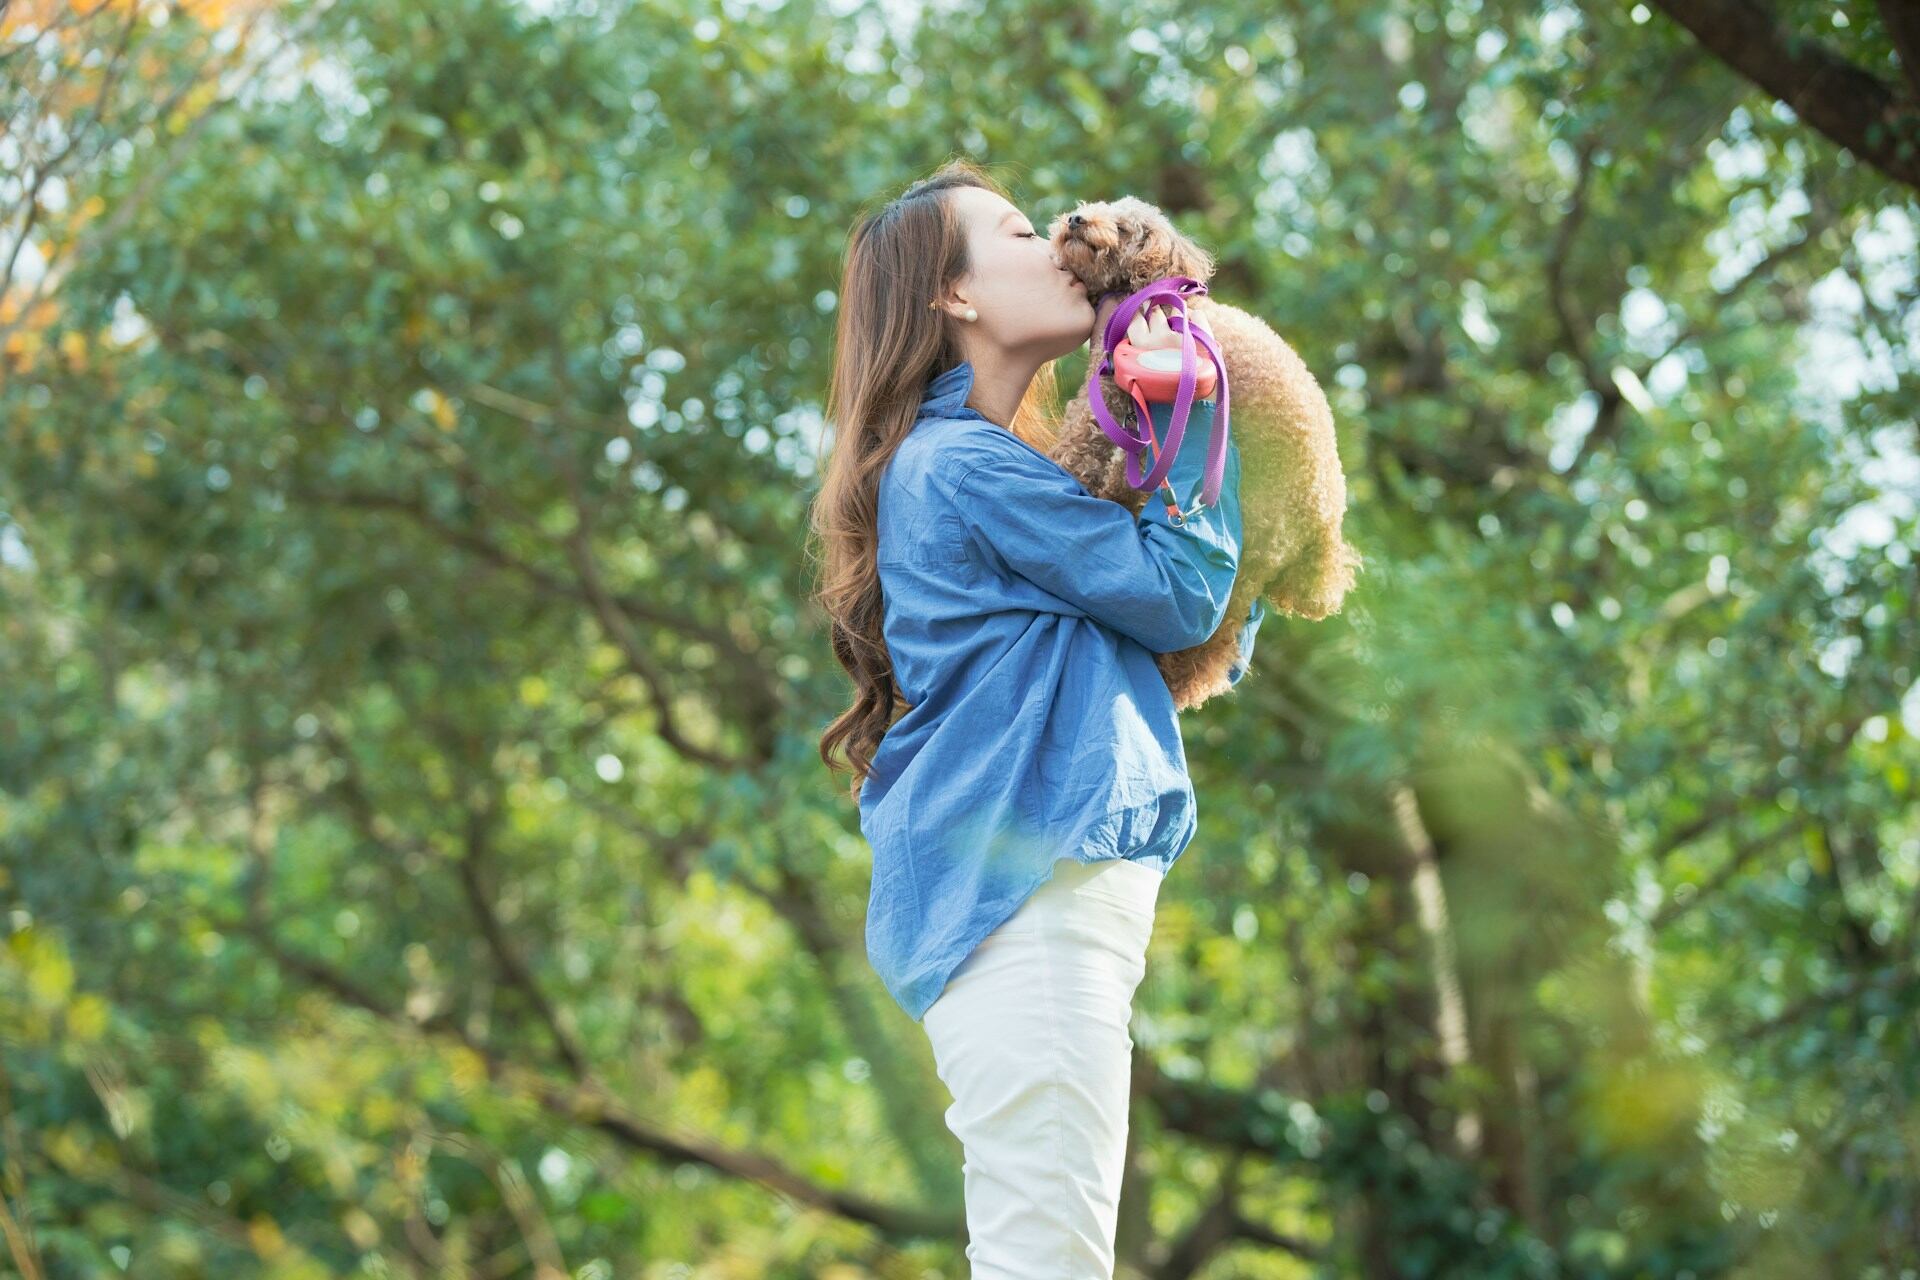 A woman hugging a small dog in a garden 